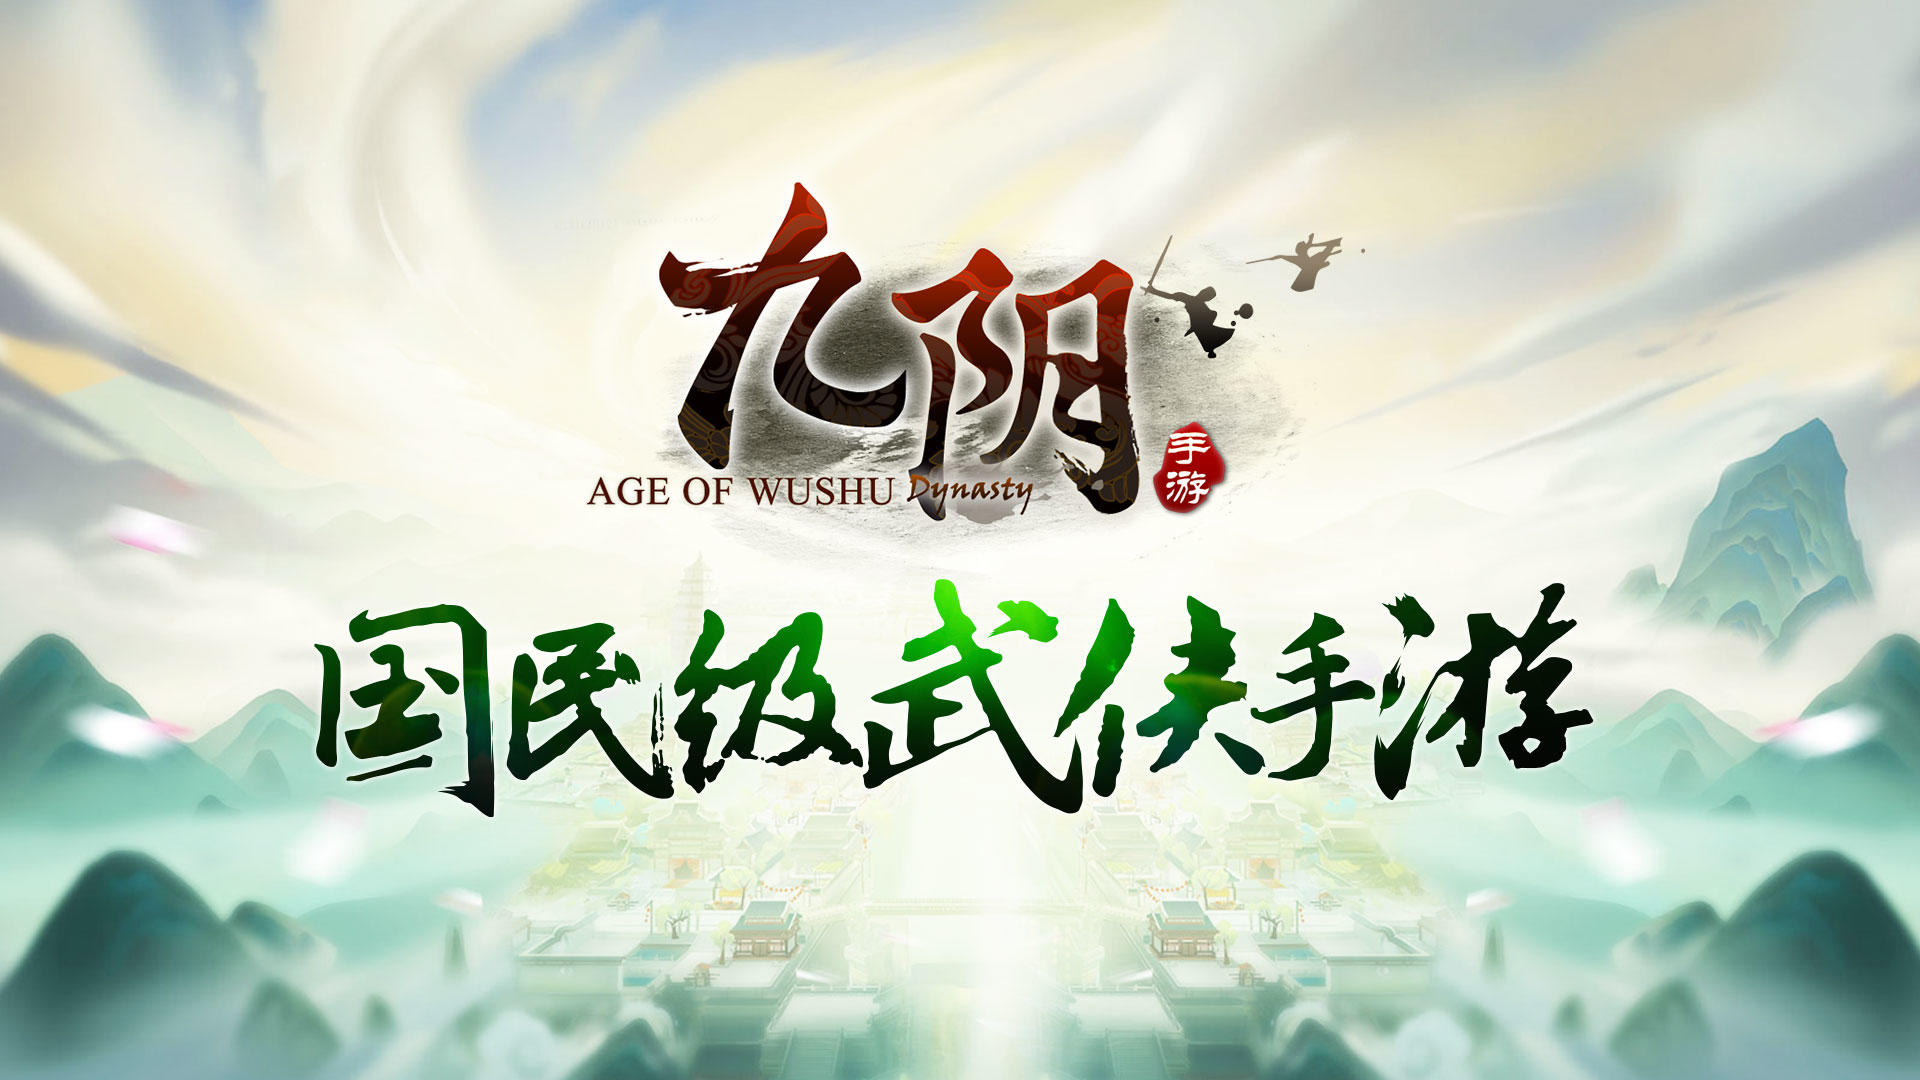 Banner of 九陰 